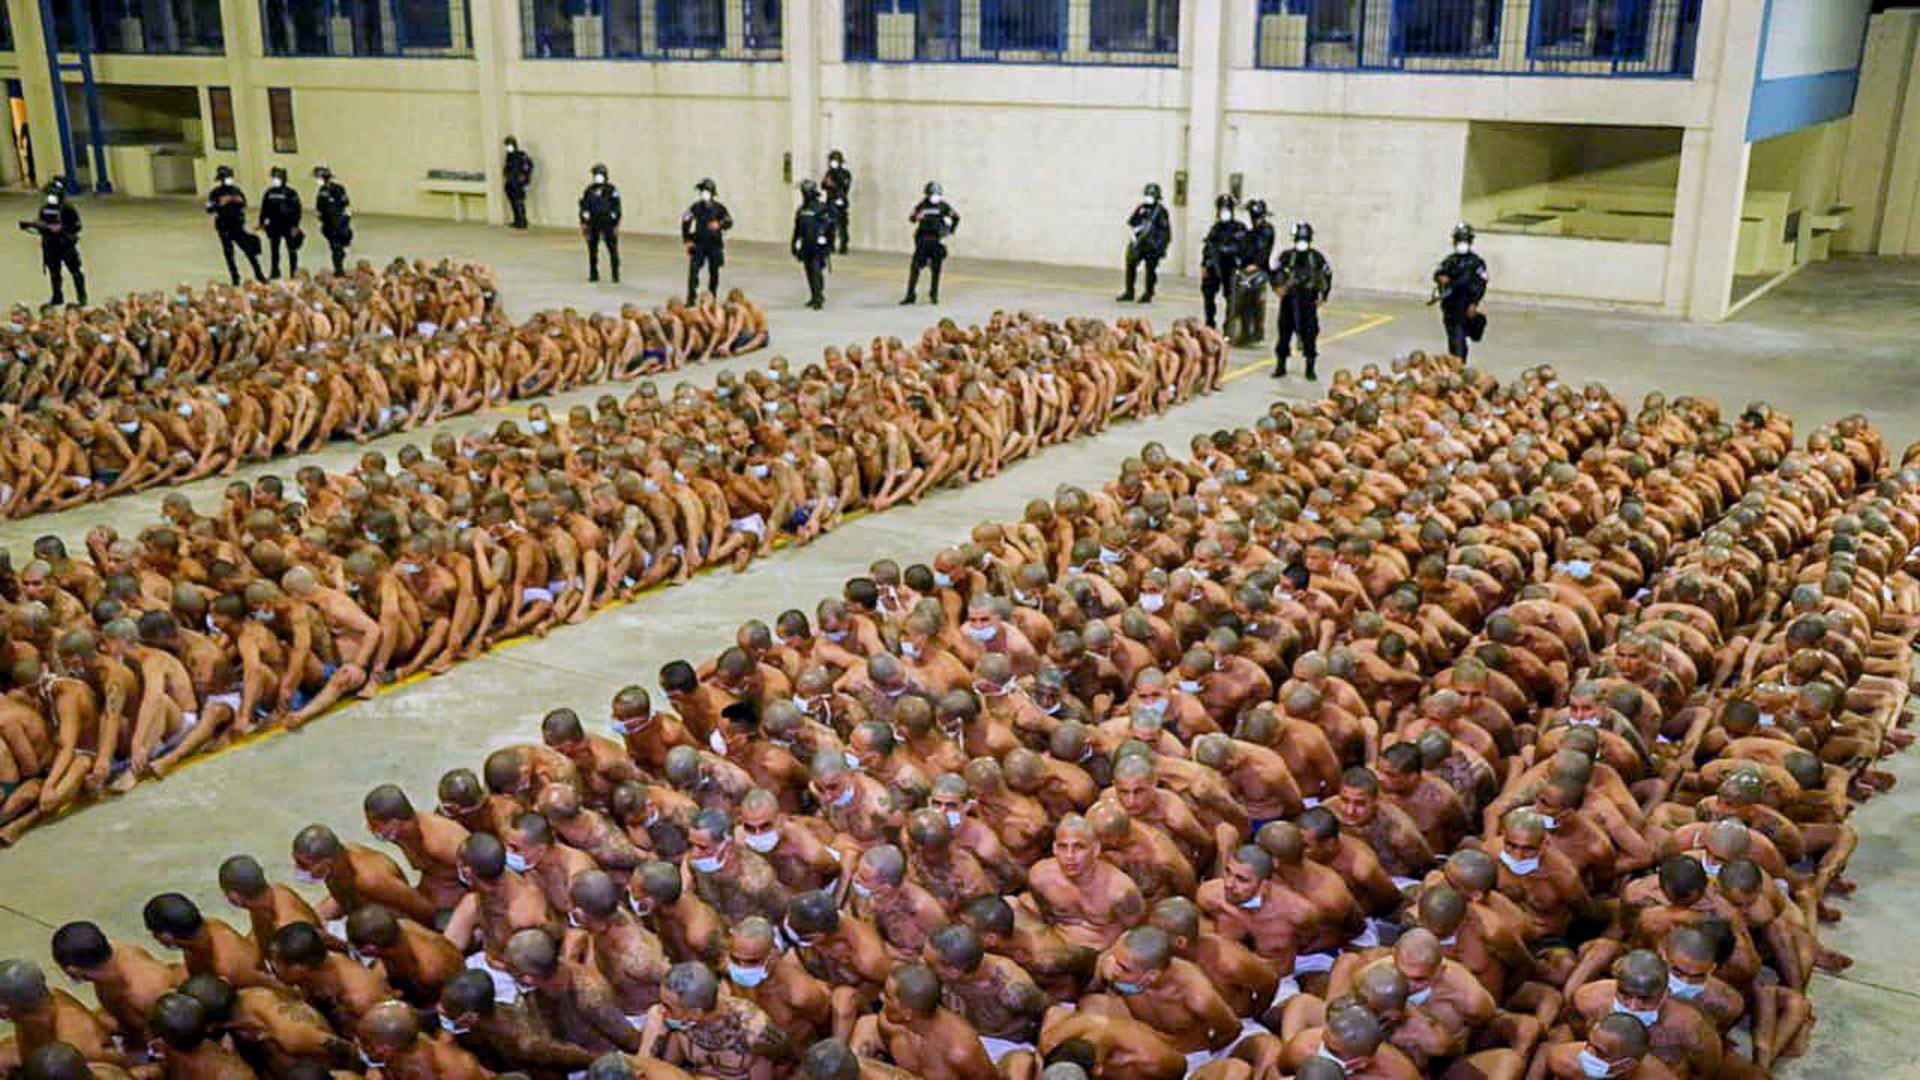 Hundreds of inmates are shown wearing only underware and sitting crammed together in rows.